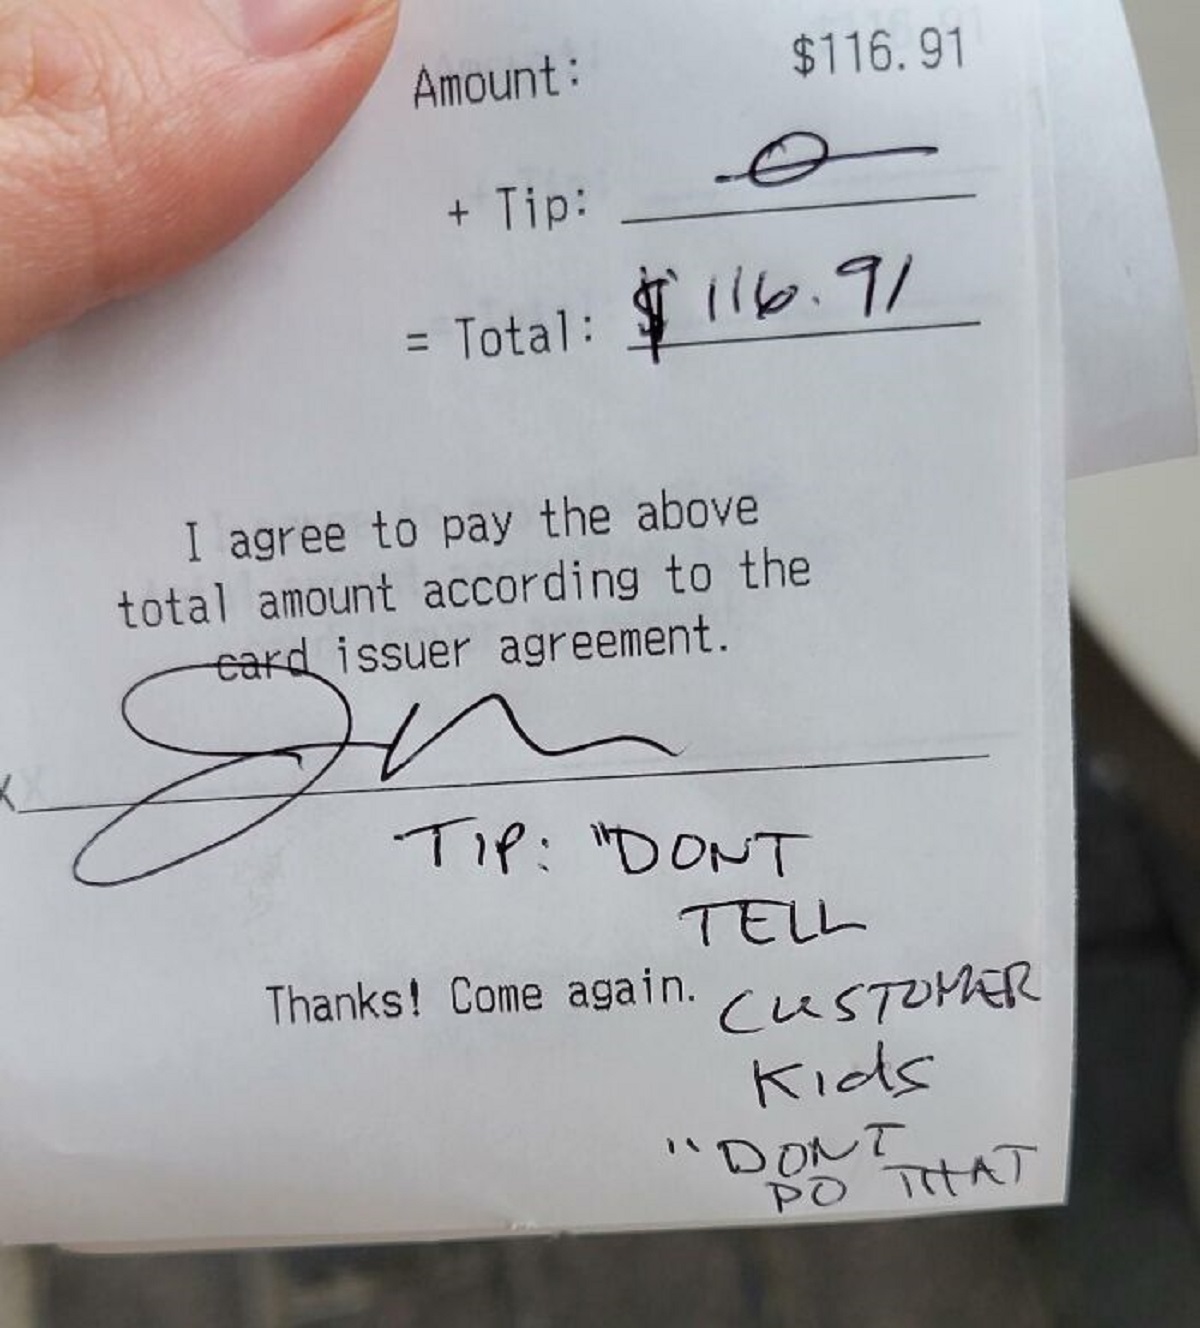 bad customers -  receipt - Amount $116.91 Tip _ Total $116.91 I agree to pay the above total amount according to the card issuer agreement. 84 Tip "Dont Tell Thanks! Come again. Customer Kids Dont Po That